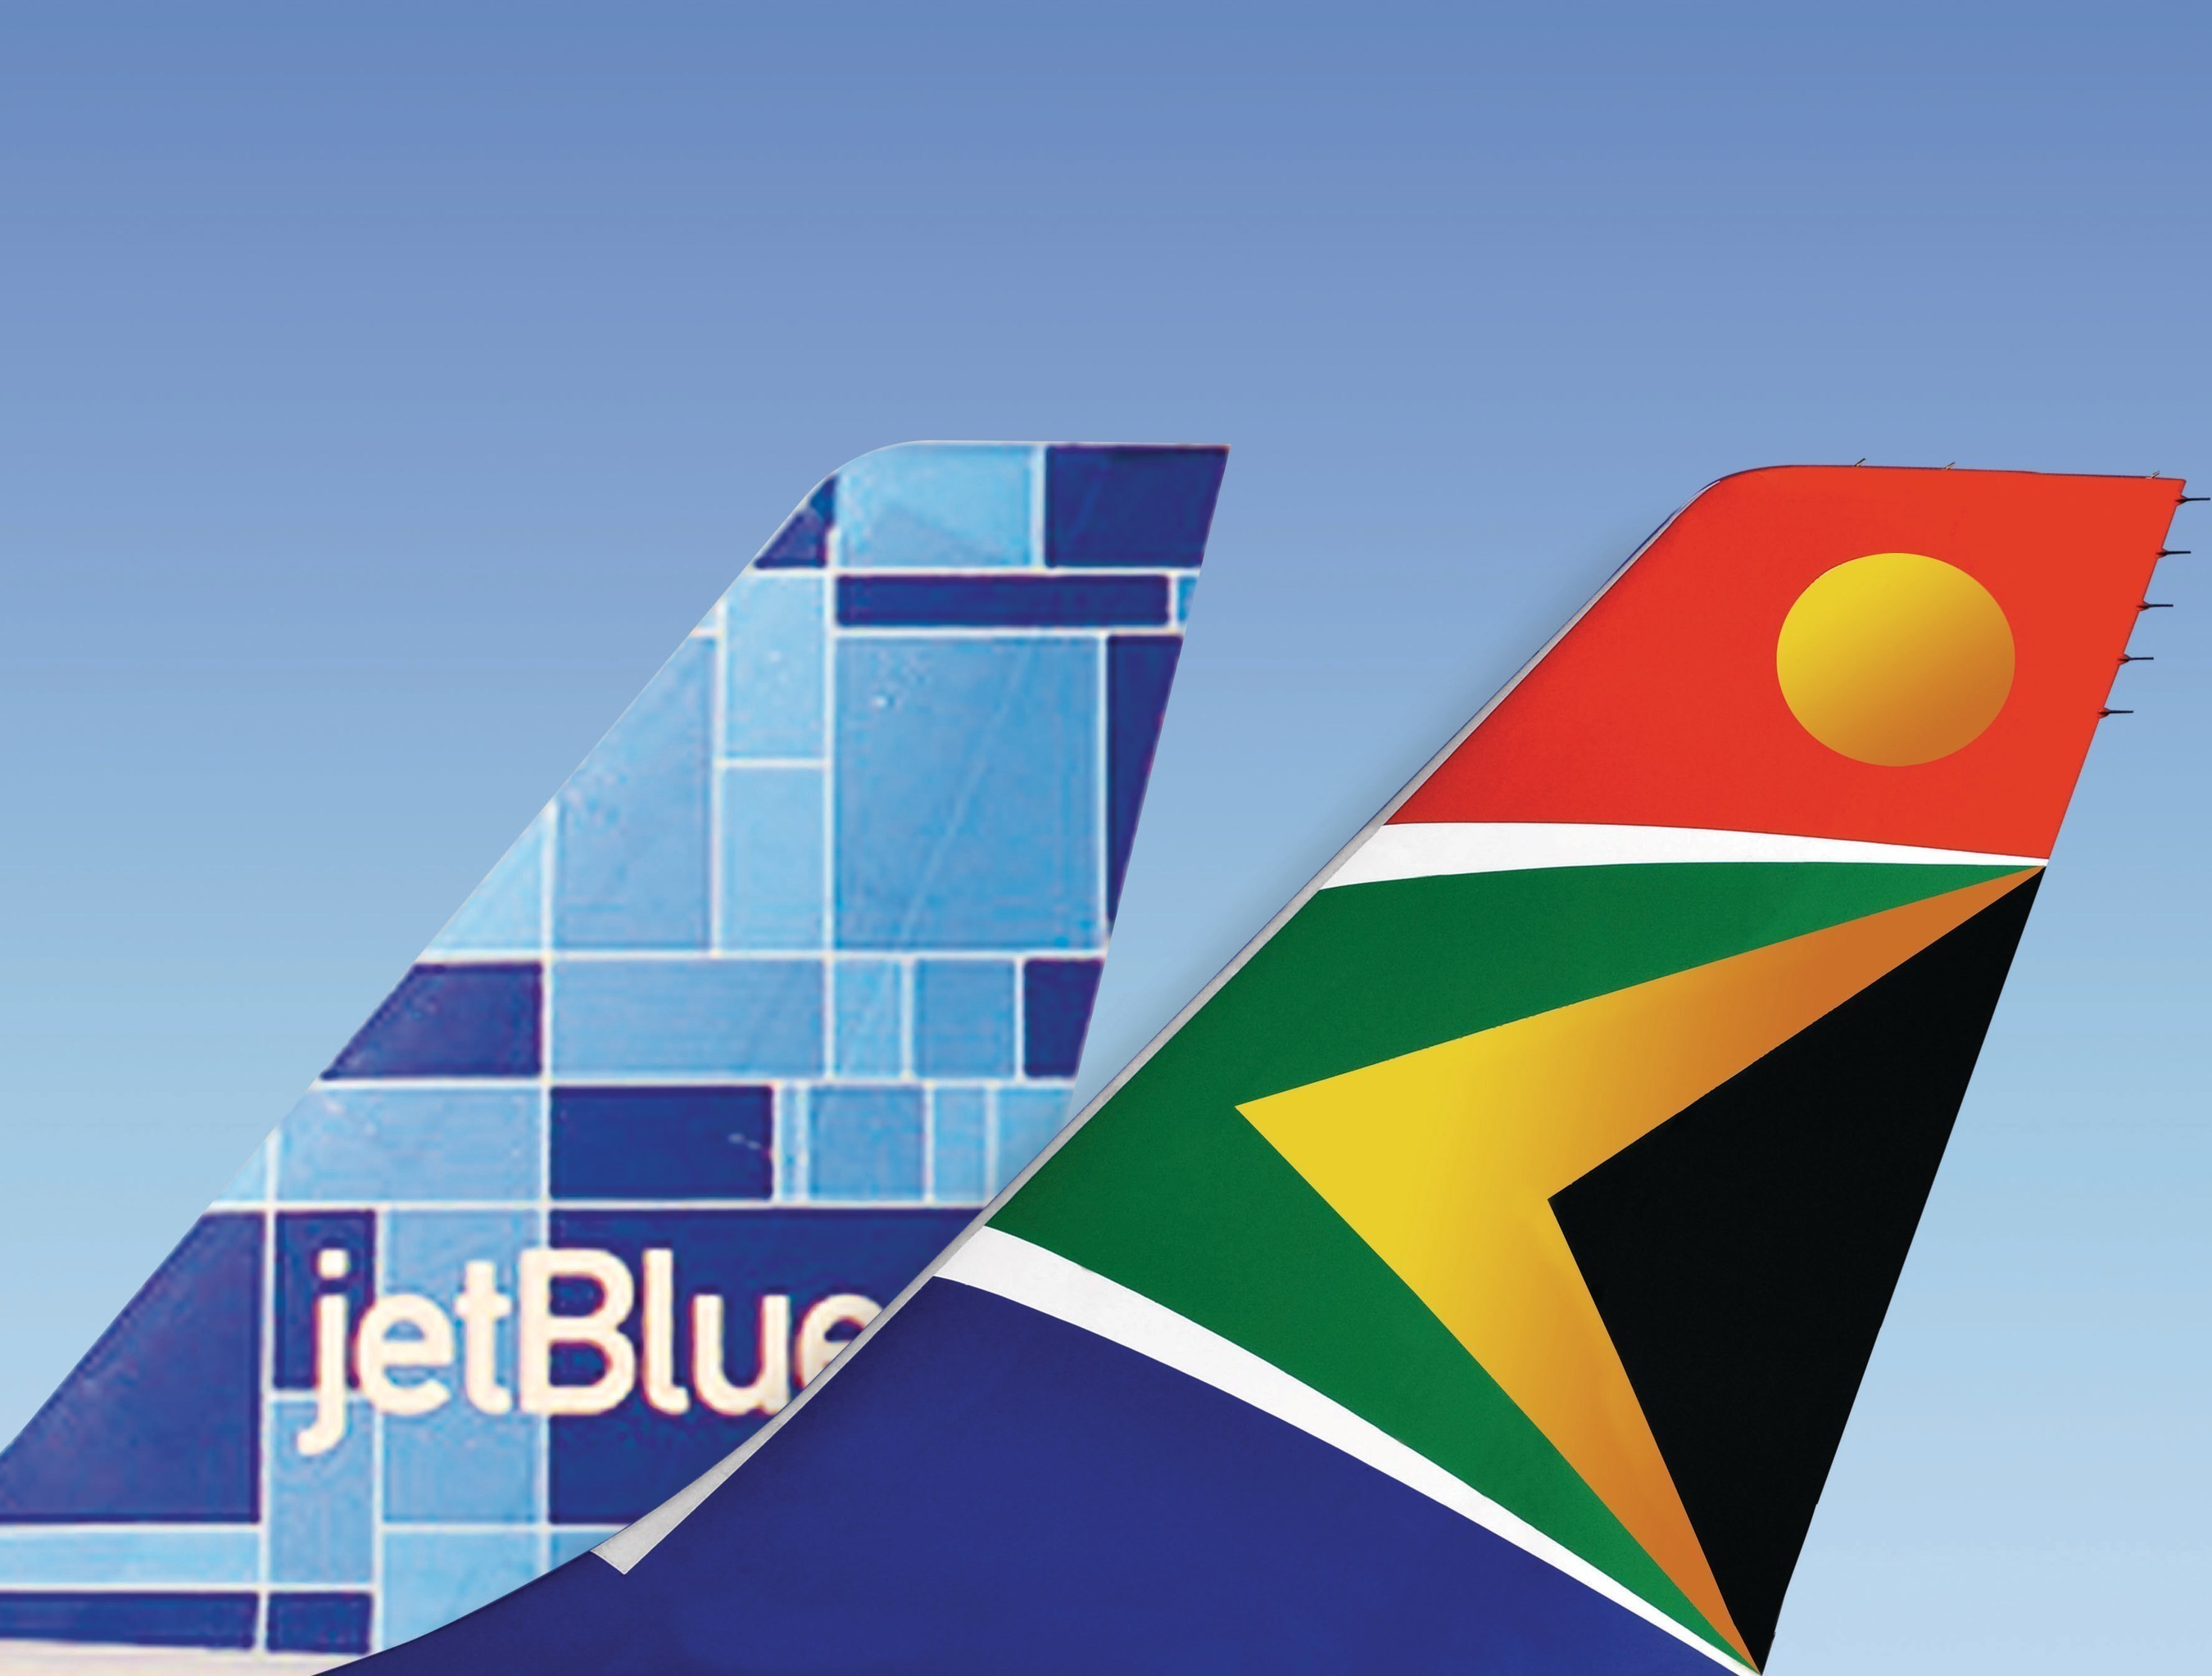 South African Airways & JetBlue Airways offer convenient service to West Africa with launch new code share flights between Washington, DC-Dulles and Accra, Ghana.